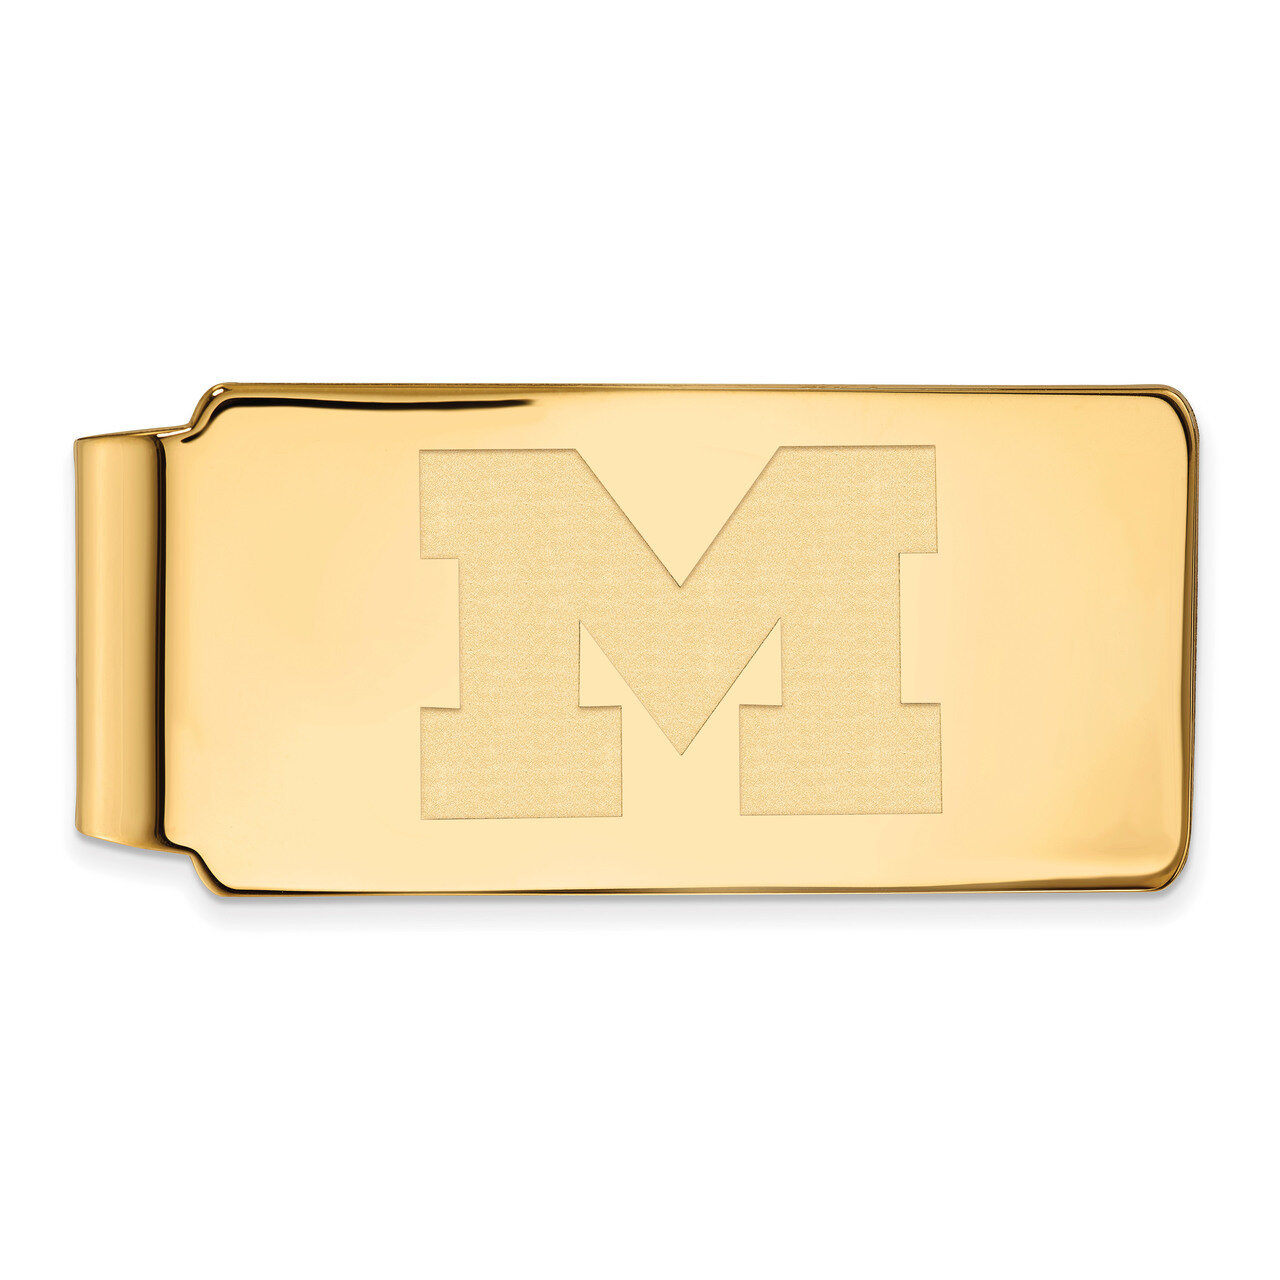 Michigan University of Money Clip Gold-plated Sterling Silver GP024UM